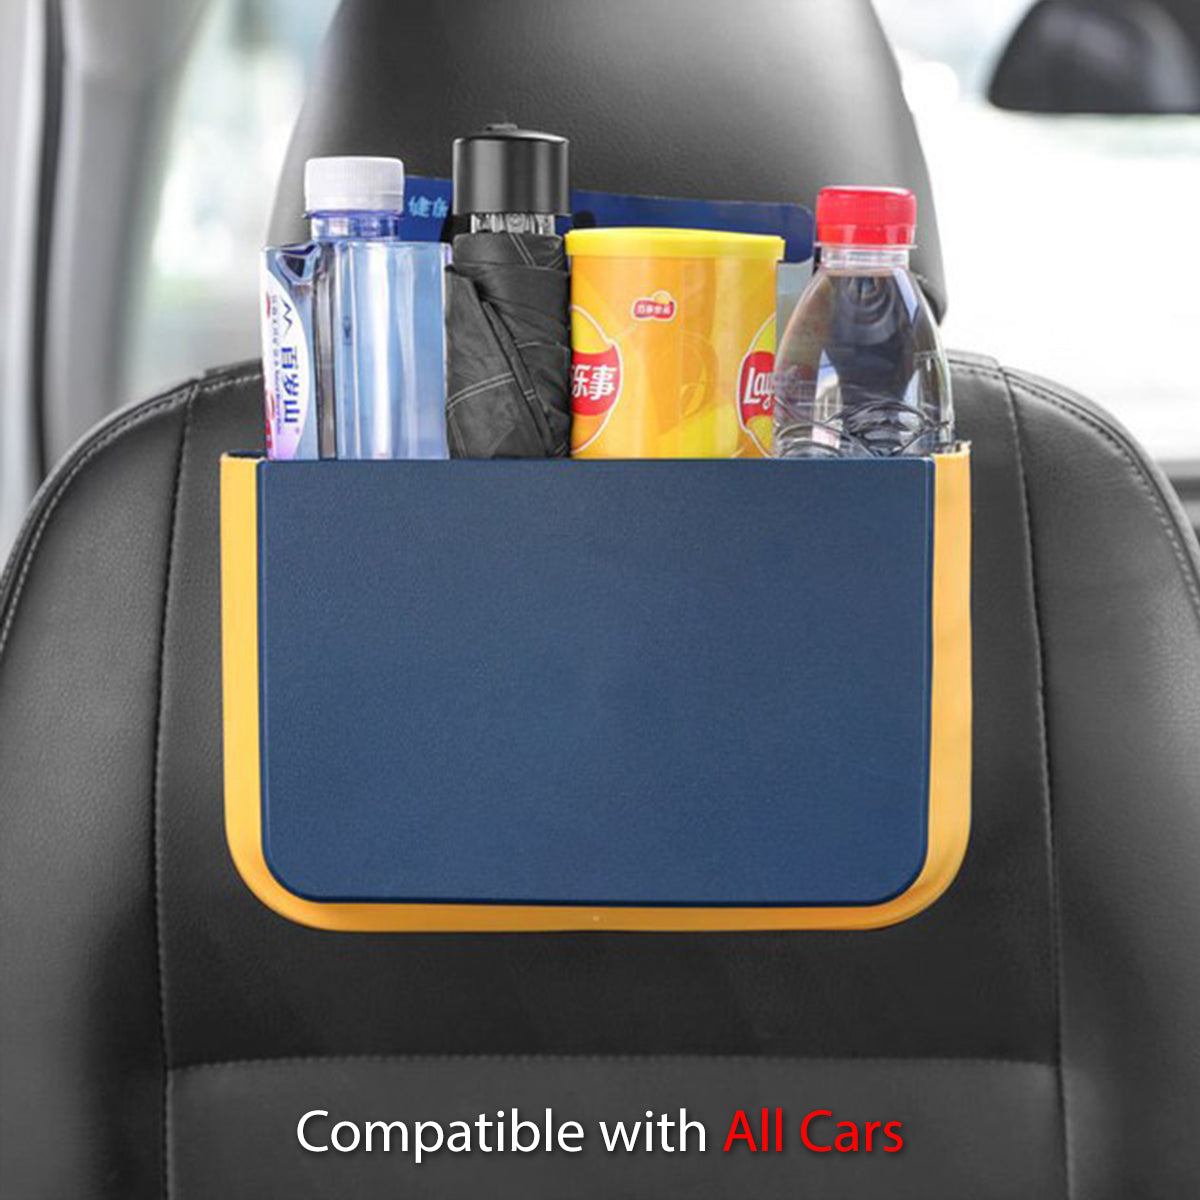 Hanging Waterproof Car Trash can-Foldable, Custom For Your Cars, Waterproof, and Equipped with Cup Holders and Trays. Multi-Purpose, Car Accessories LI11992